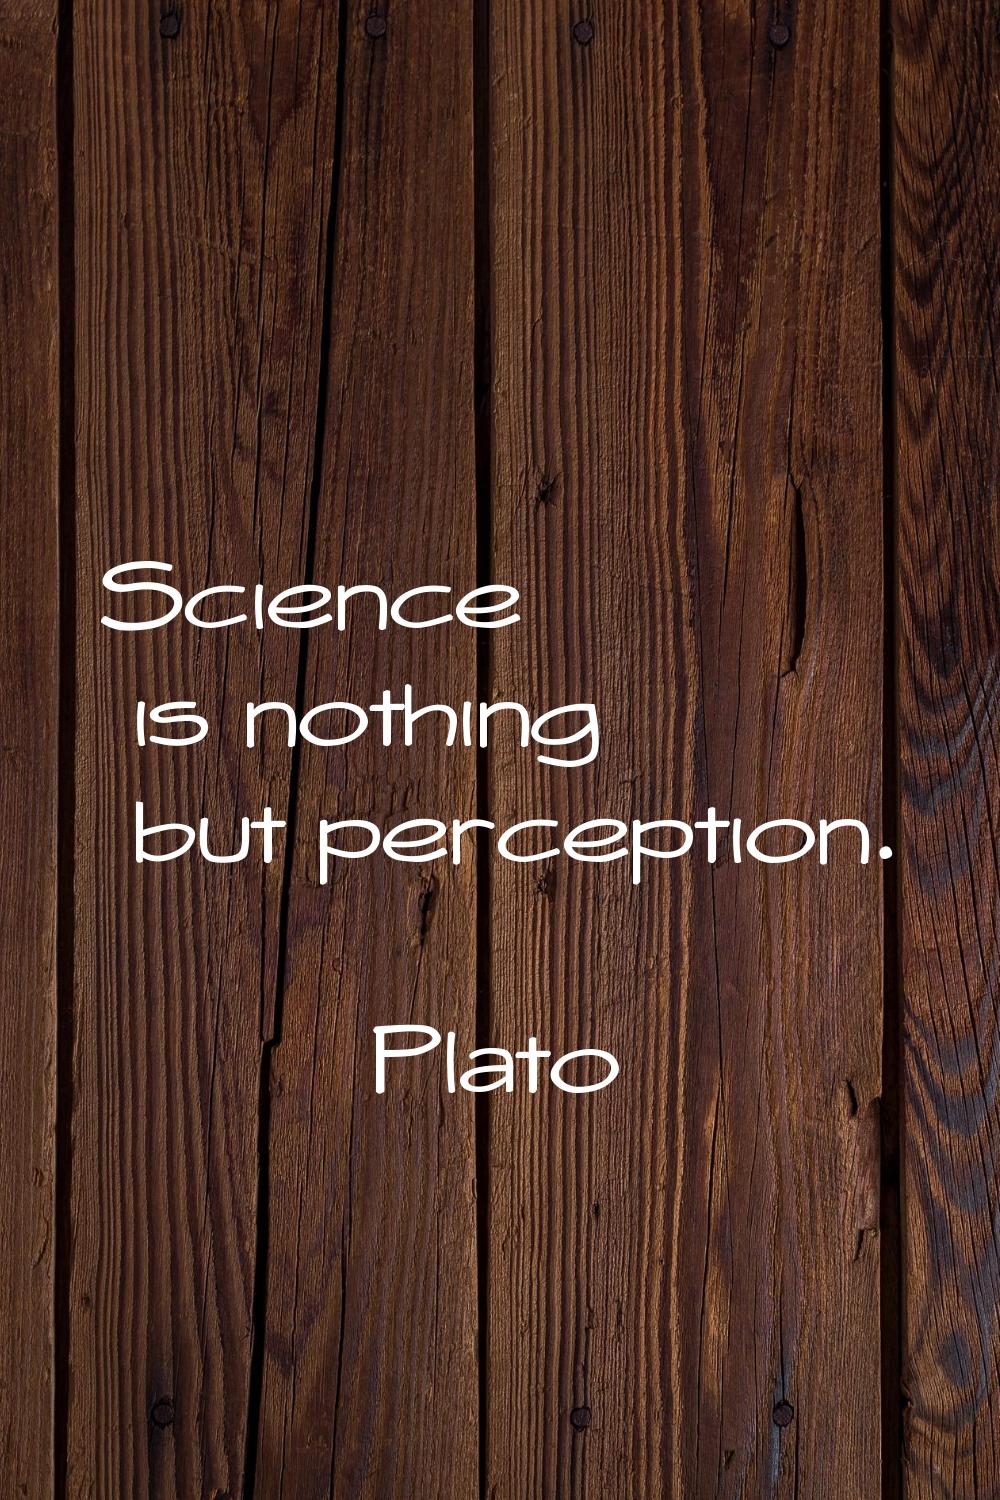 Science is nothing but perception.